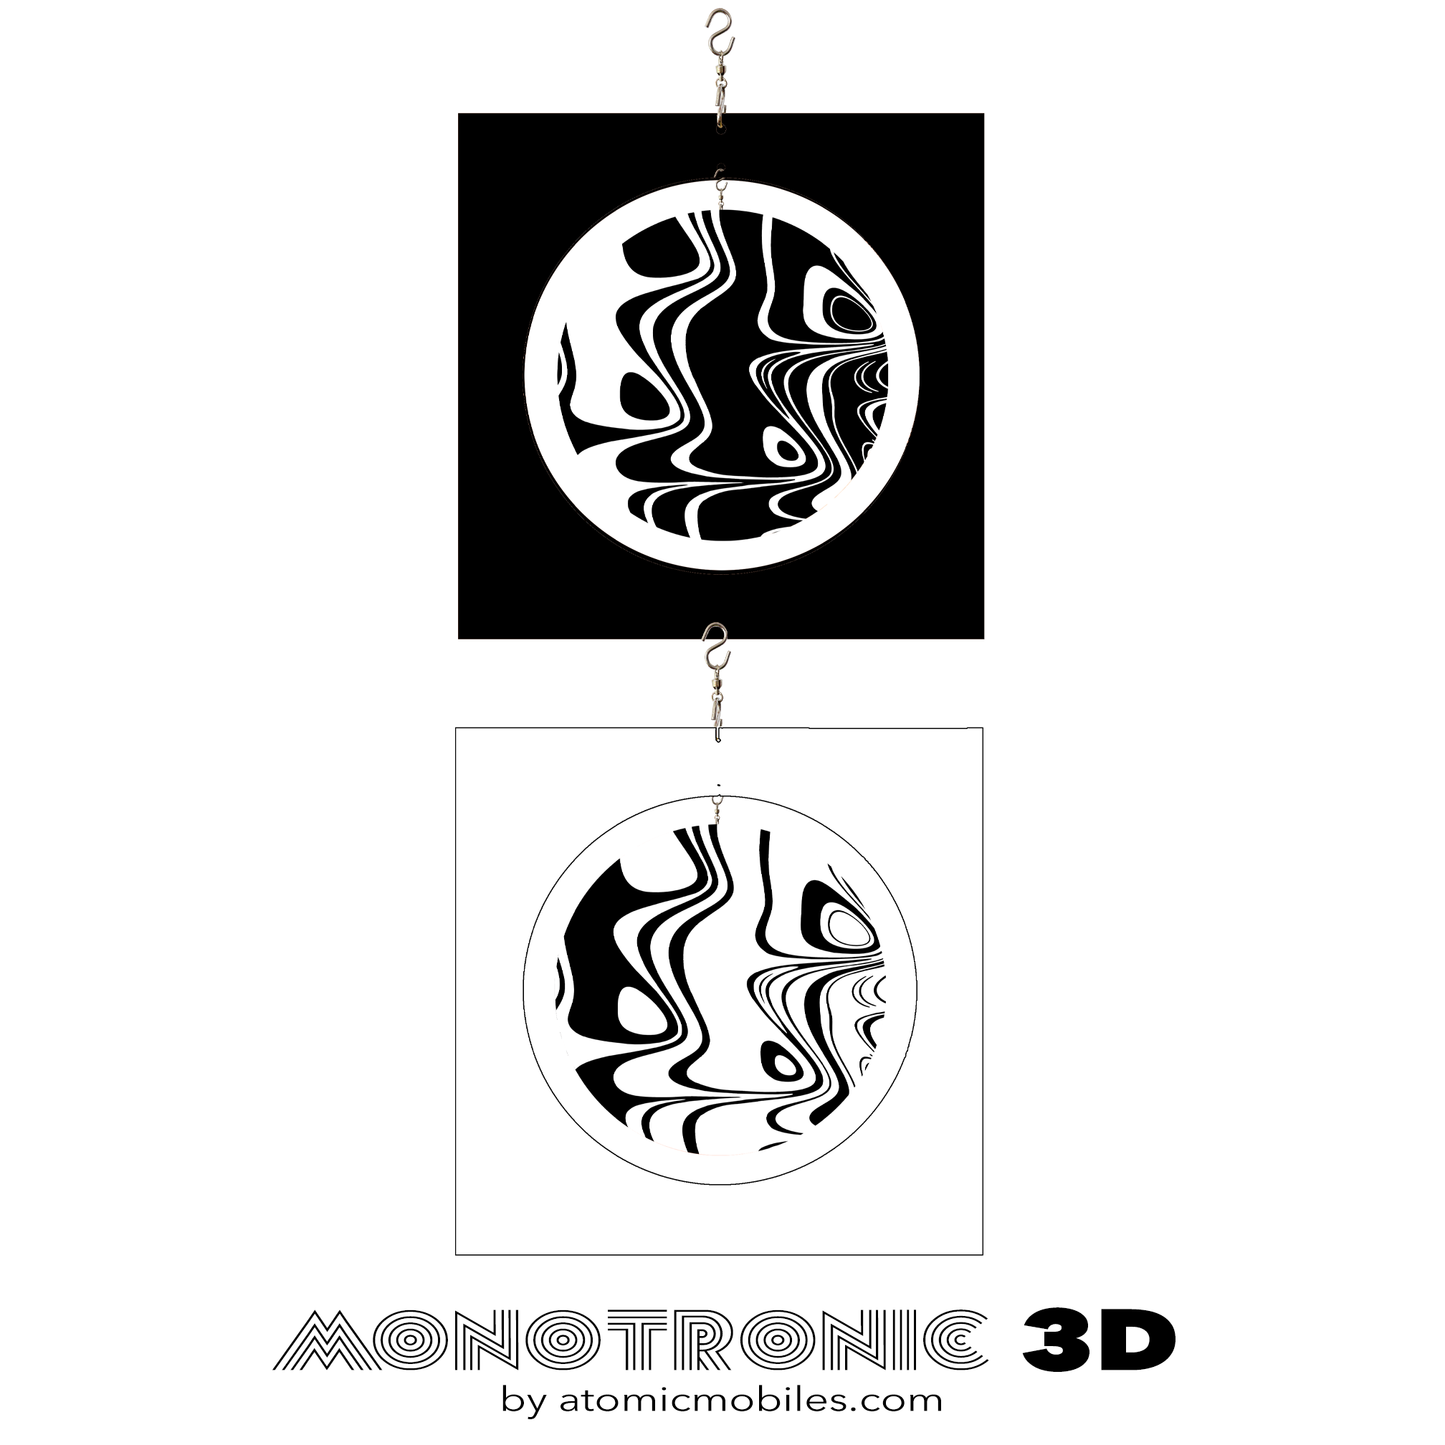 Groovy MONOTRONIC 3D 2 Panel Retro Black and White acrylic plexiglass kinetic hanging art in 1970s style by AtomicMobiles.com